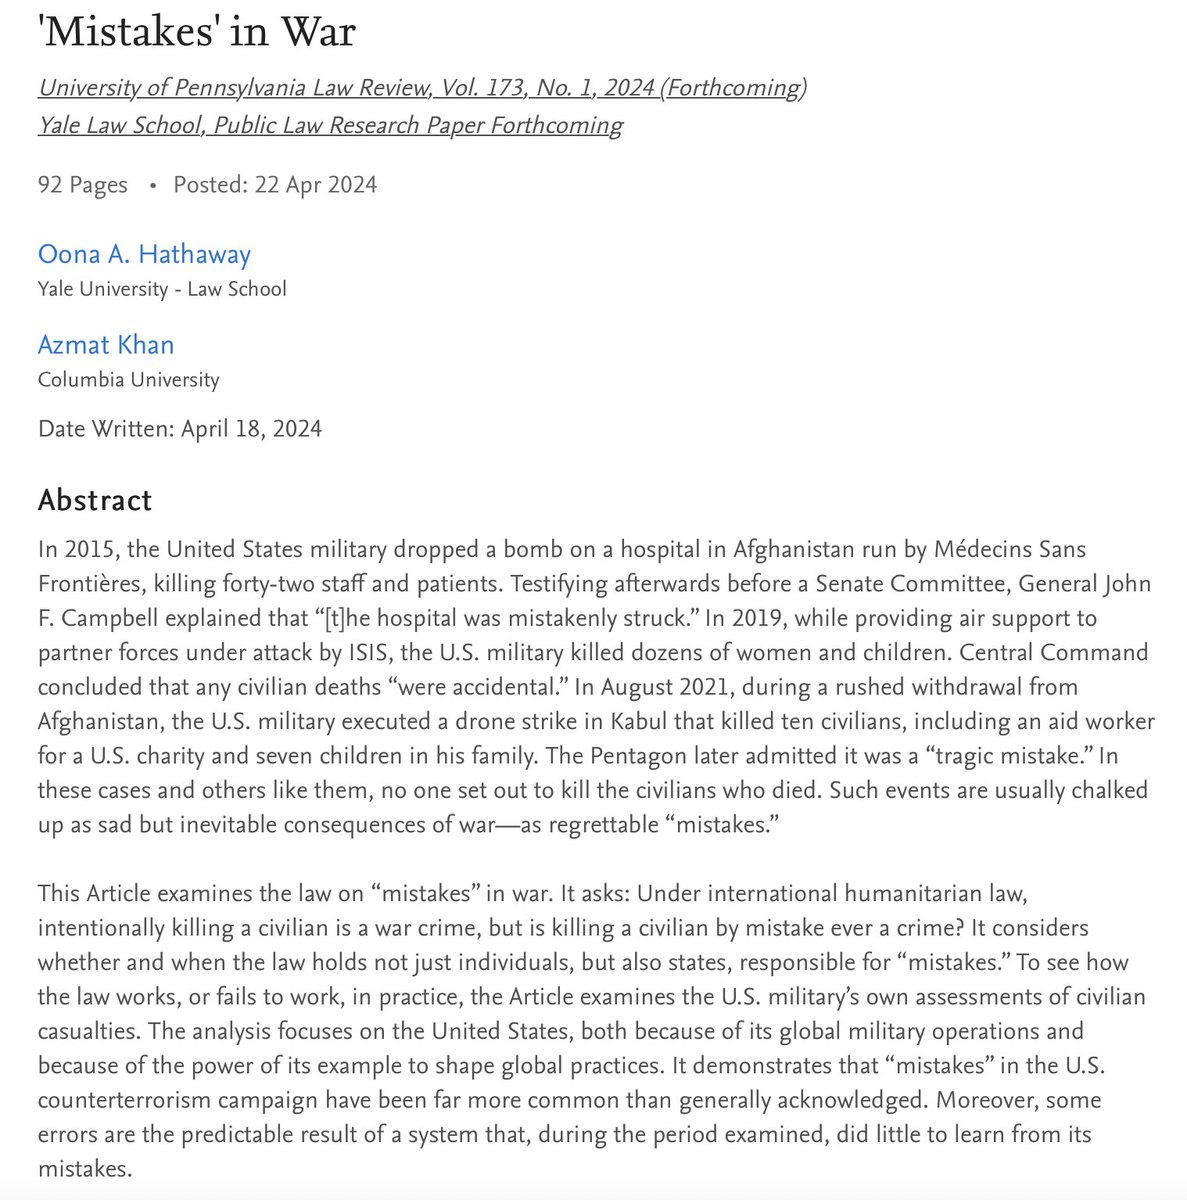 New article: ''Mistakes' in War,' coauthored with @AzmatZahra (Azmat Khan, who received the Pulitzer Prize for the 'The Civilian Casualty Files'). Forthcoming in @PennLRev. Read it here: papers.ssrn.com/sol3/papers.cf…